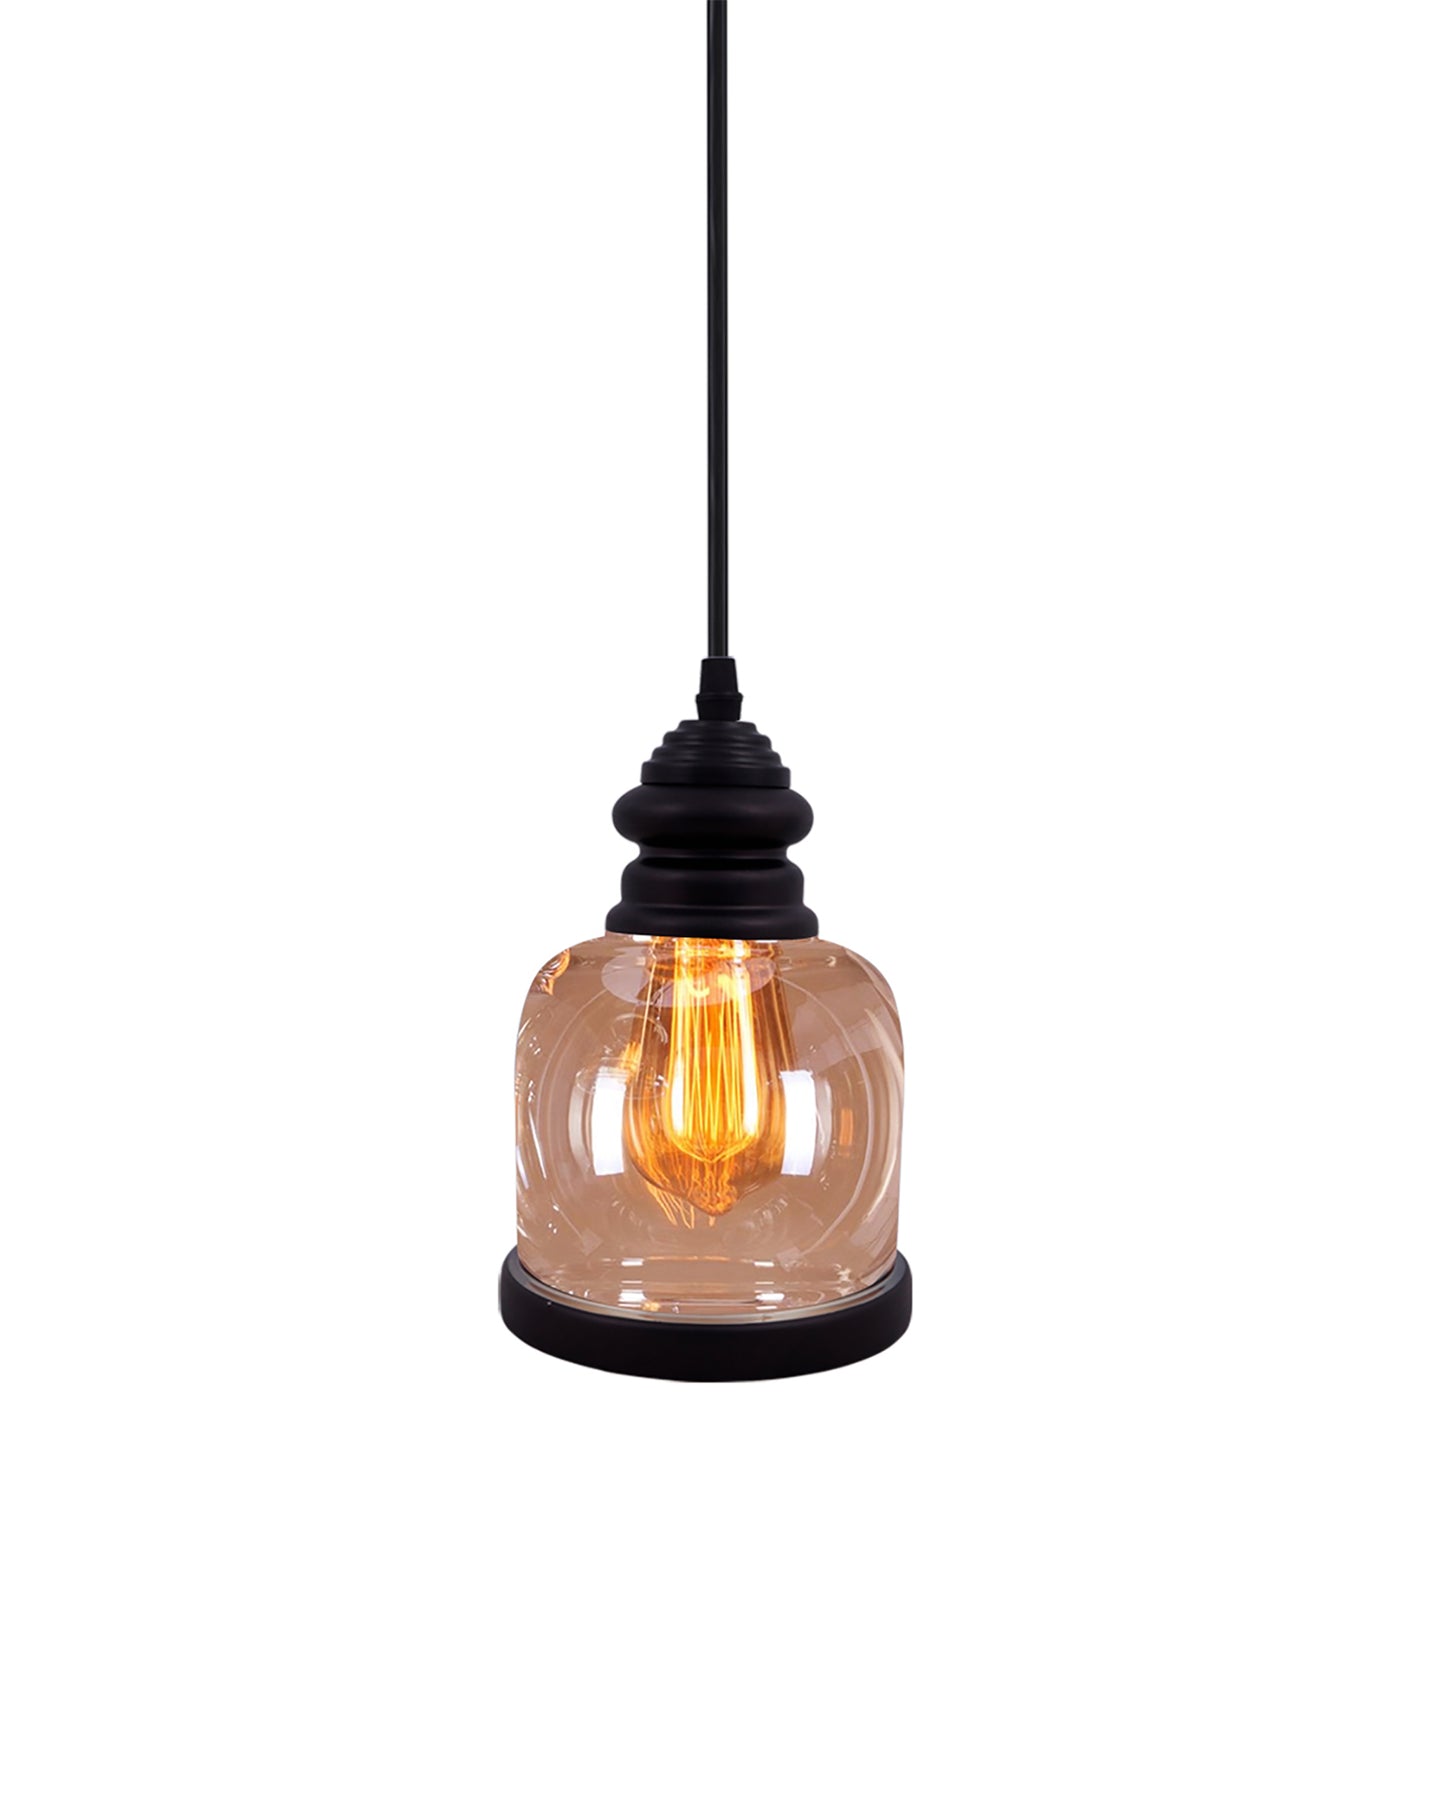 Cylinder Pendant Light with Amber Glass Jar Shade Matte Adjustable Hanging Lighting Fixture, Industrial Antique Pendant Lamp for Kitchen Island, Dining Room, Foyer, Farmhouse